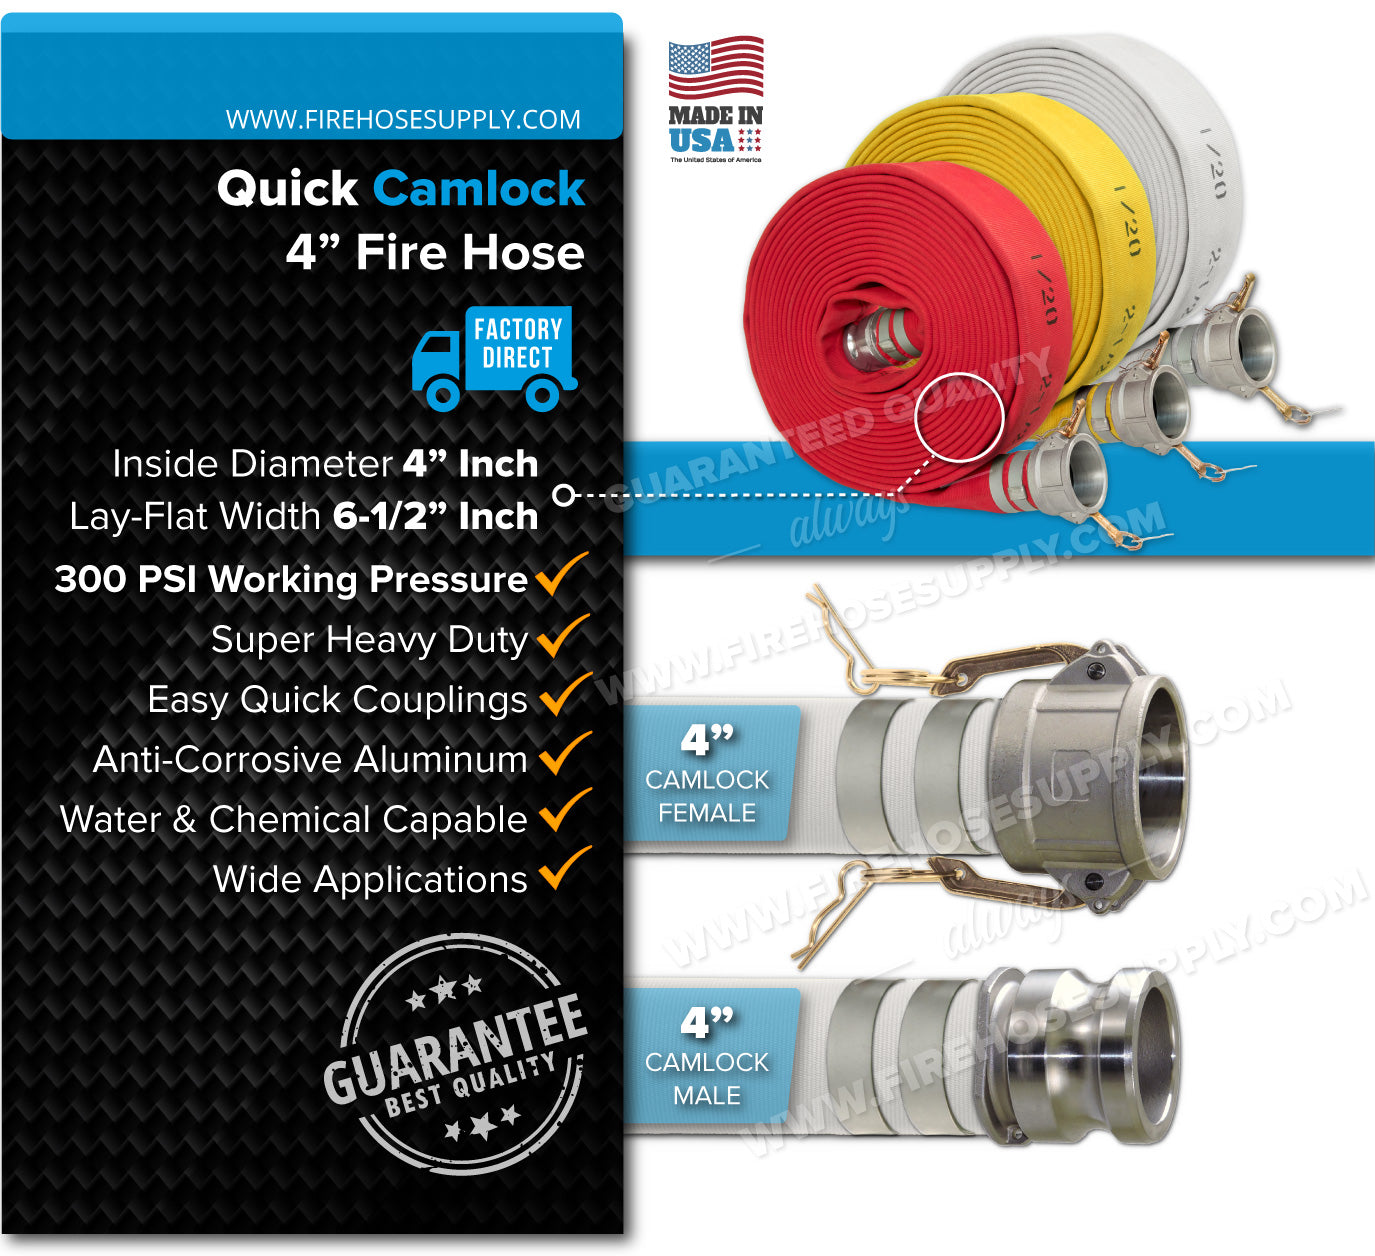 4 Inch Double Jacket Camlock Fire Hose Overview